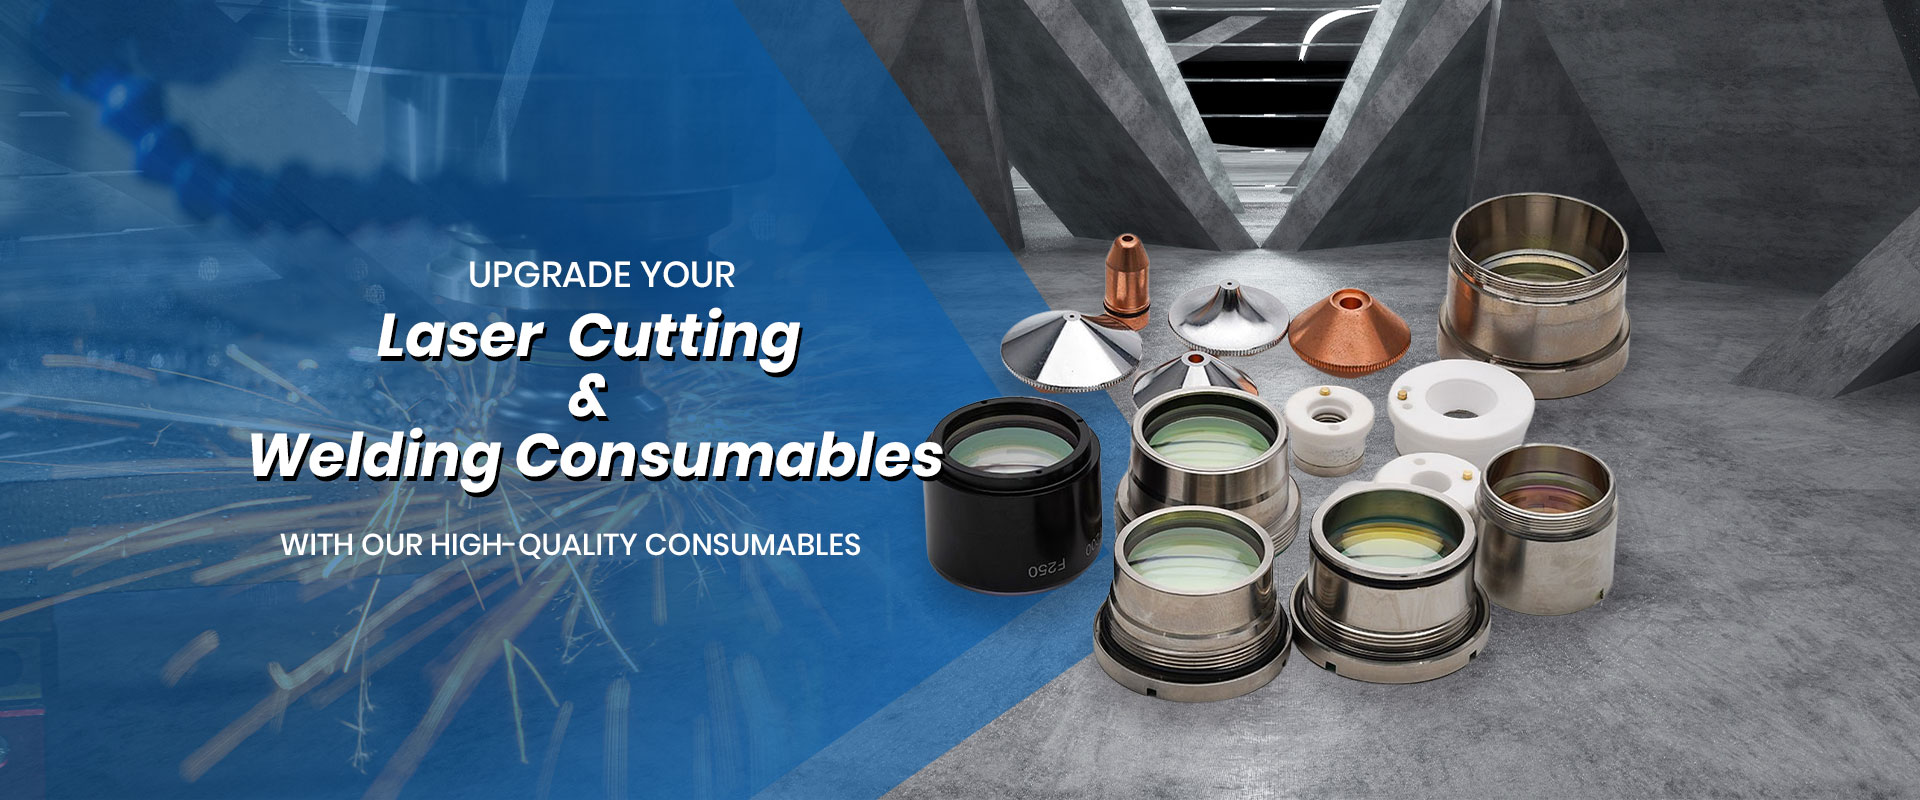 Upgrade your laser cutting and welding equipment with our high-quality consumables.